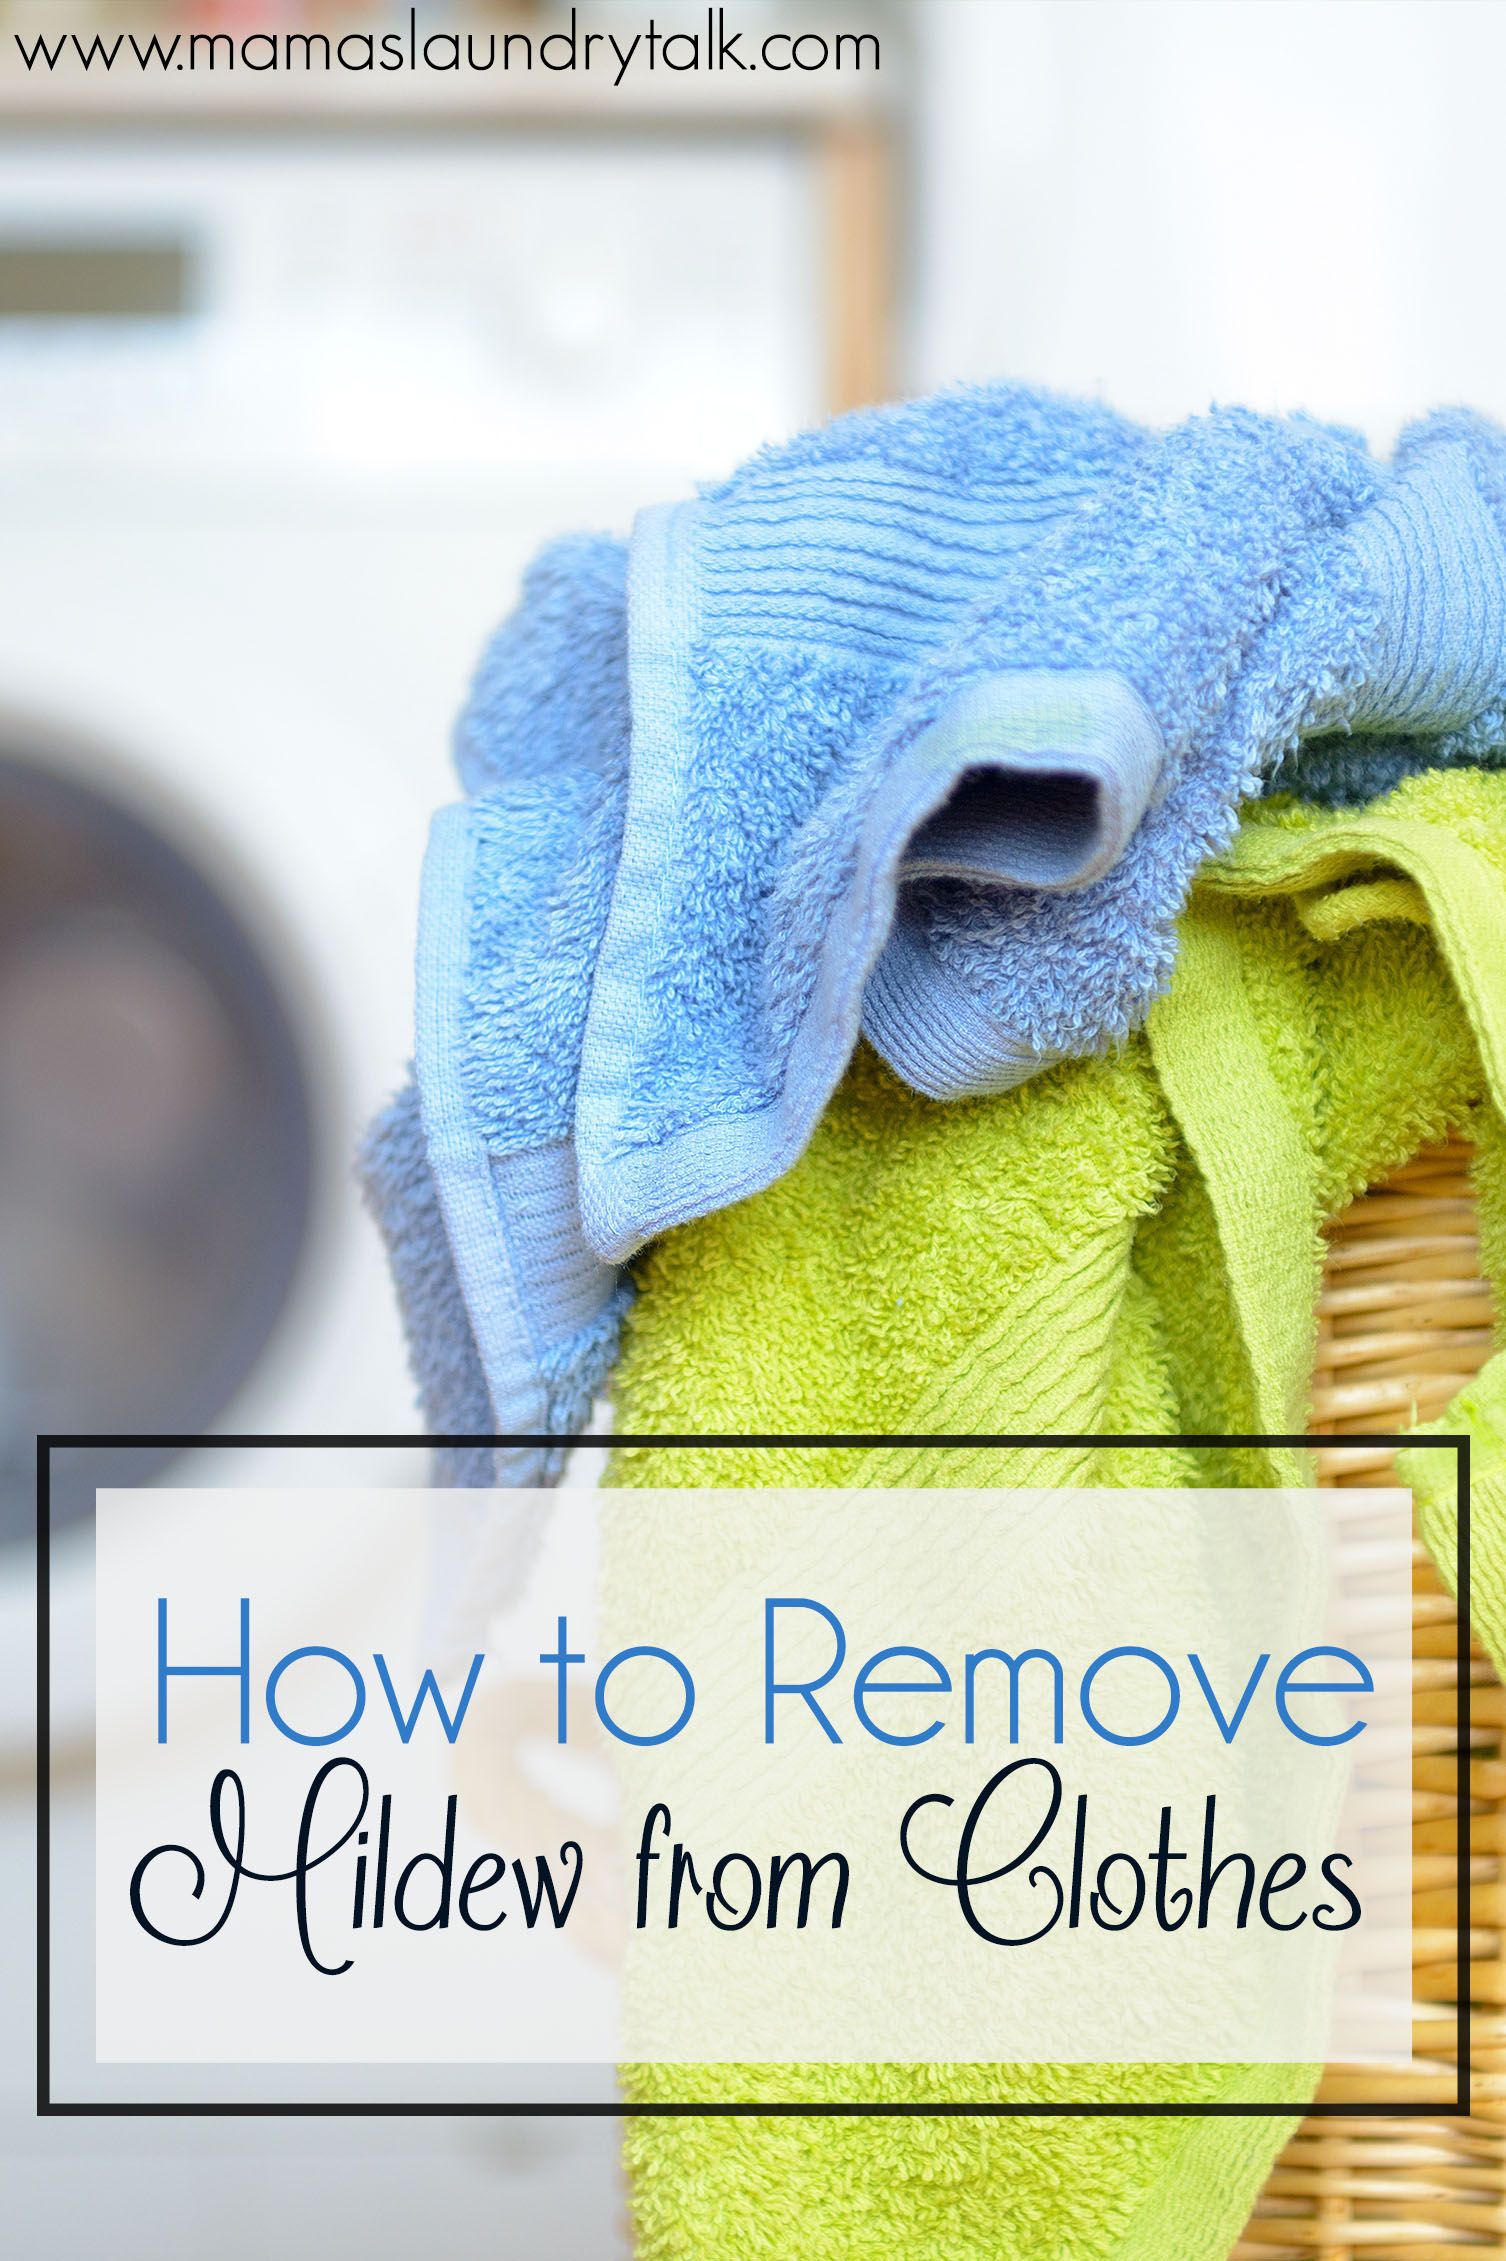 How to Remove Mildew from Clothes (With images)